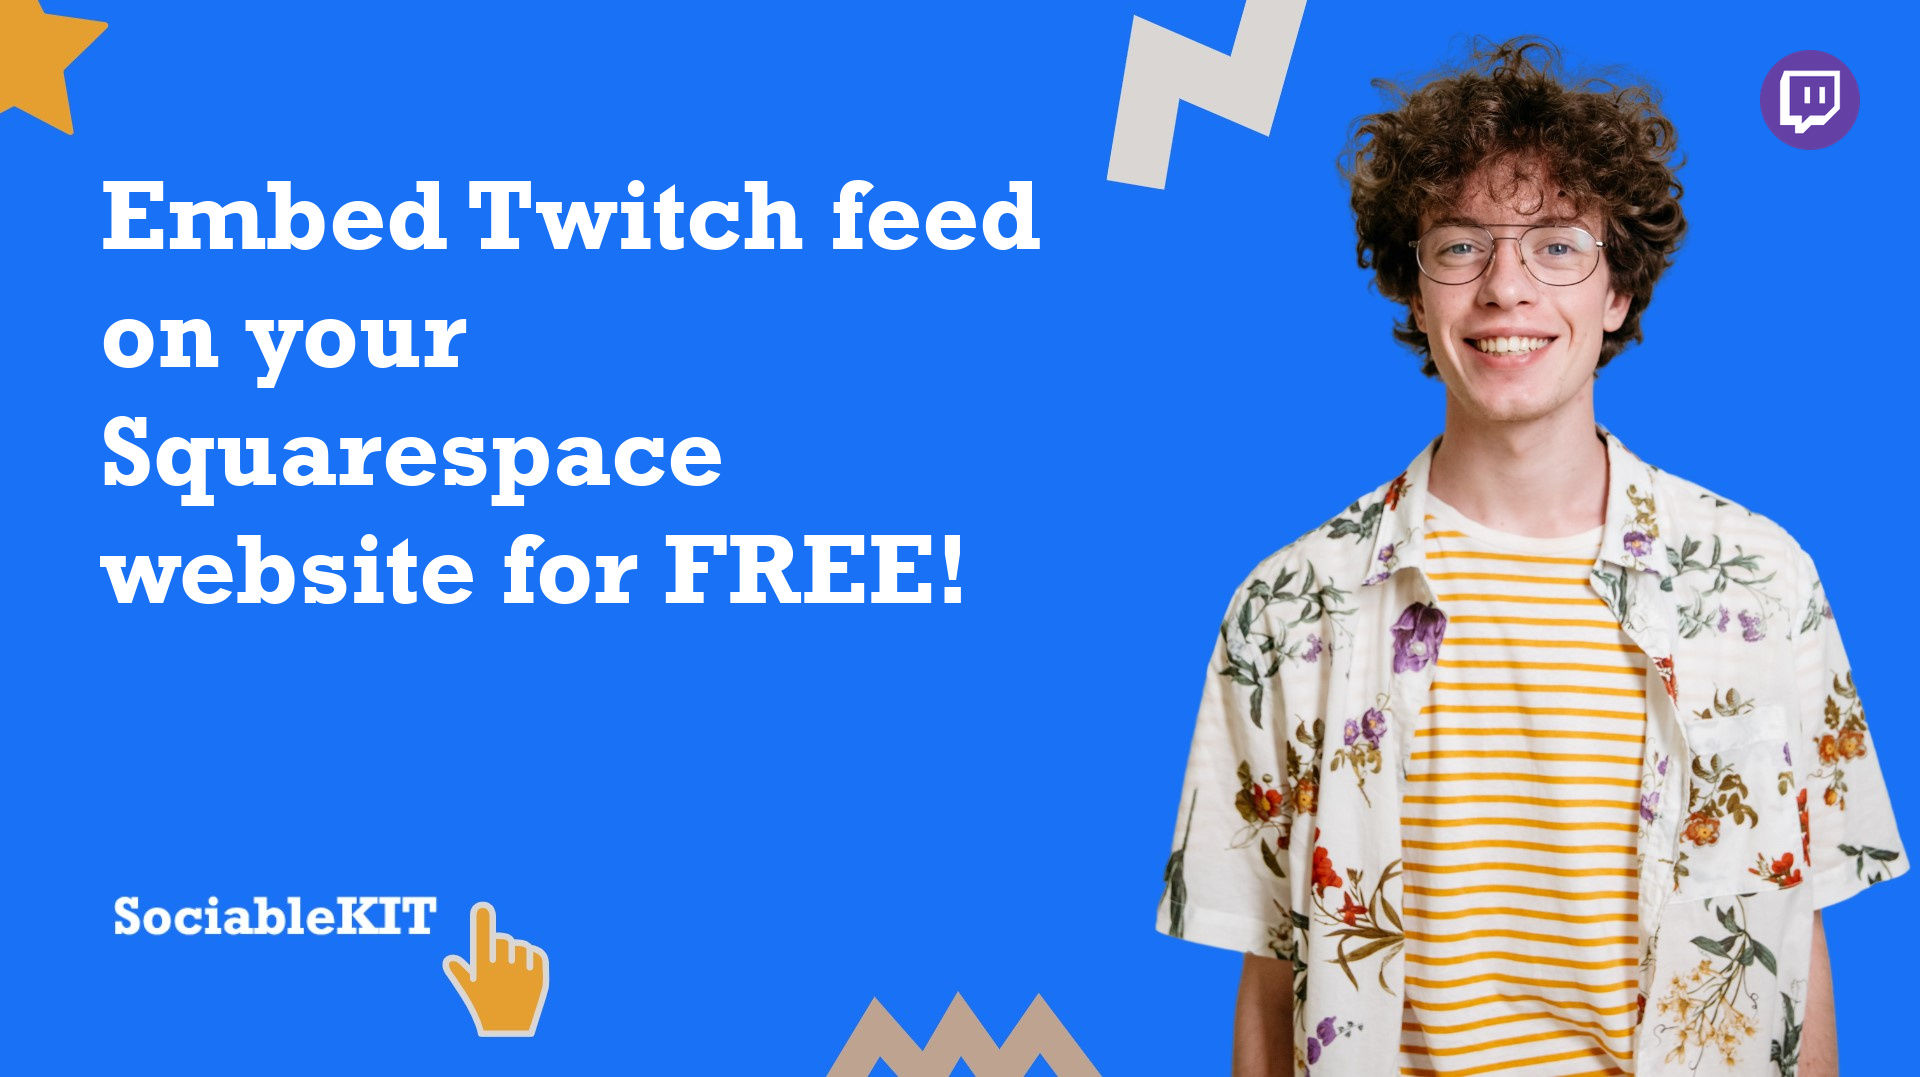 How to embed Twitch feed on your Squarespace website for FREE?